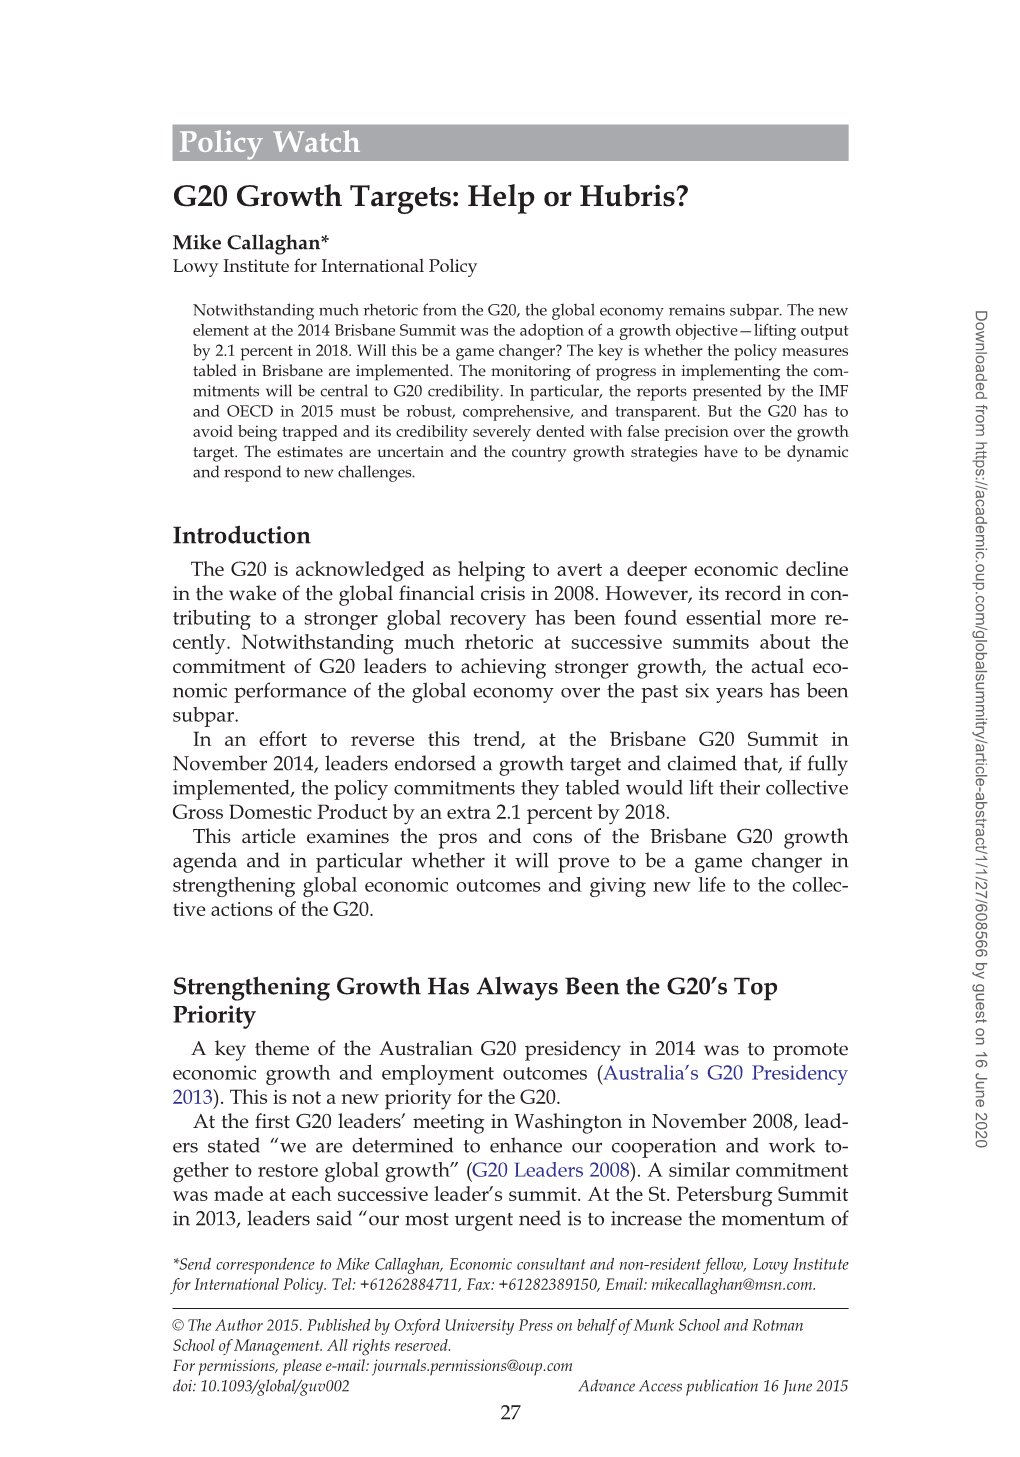 Policy Watch G20 Growth Targets: Help Or Hubris? Mike Callaghan* Lowy Institute for International Policy